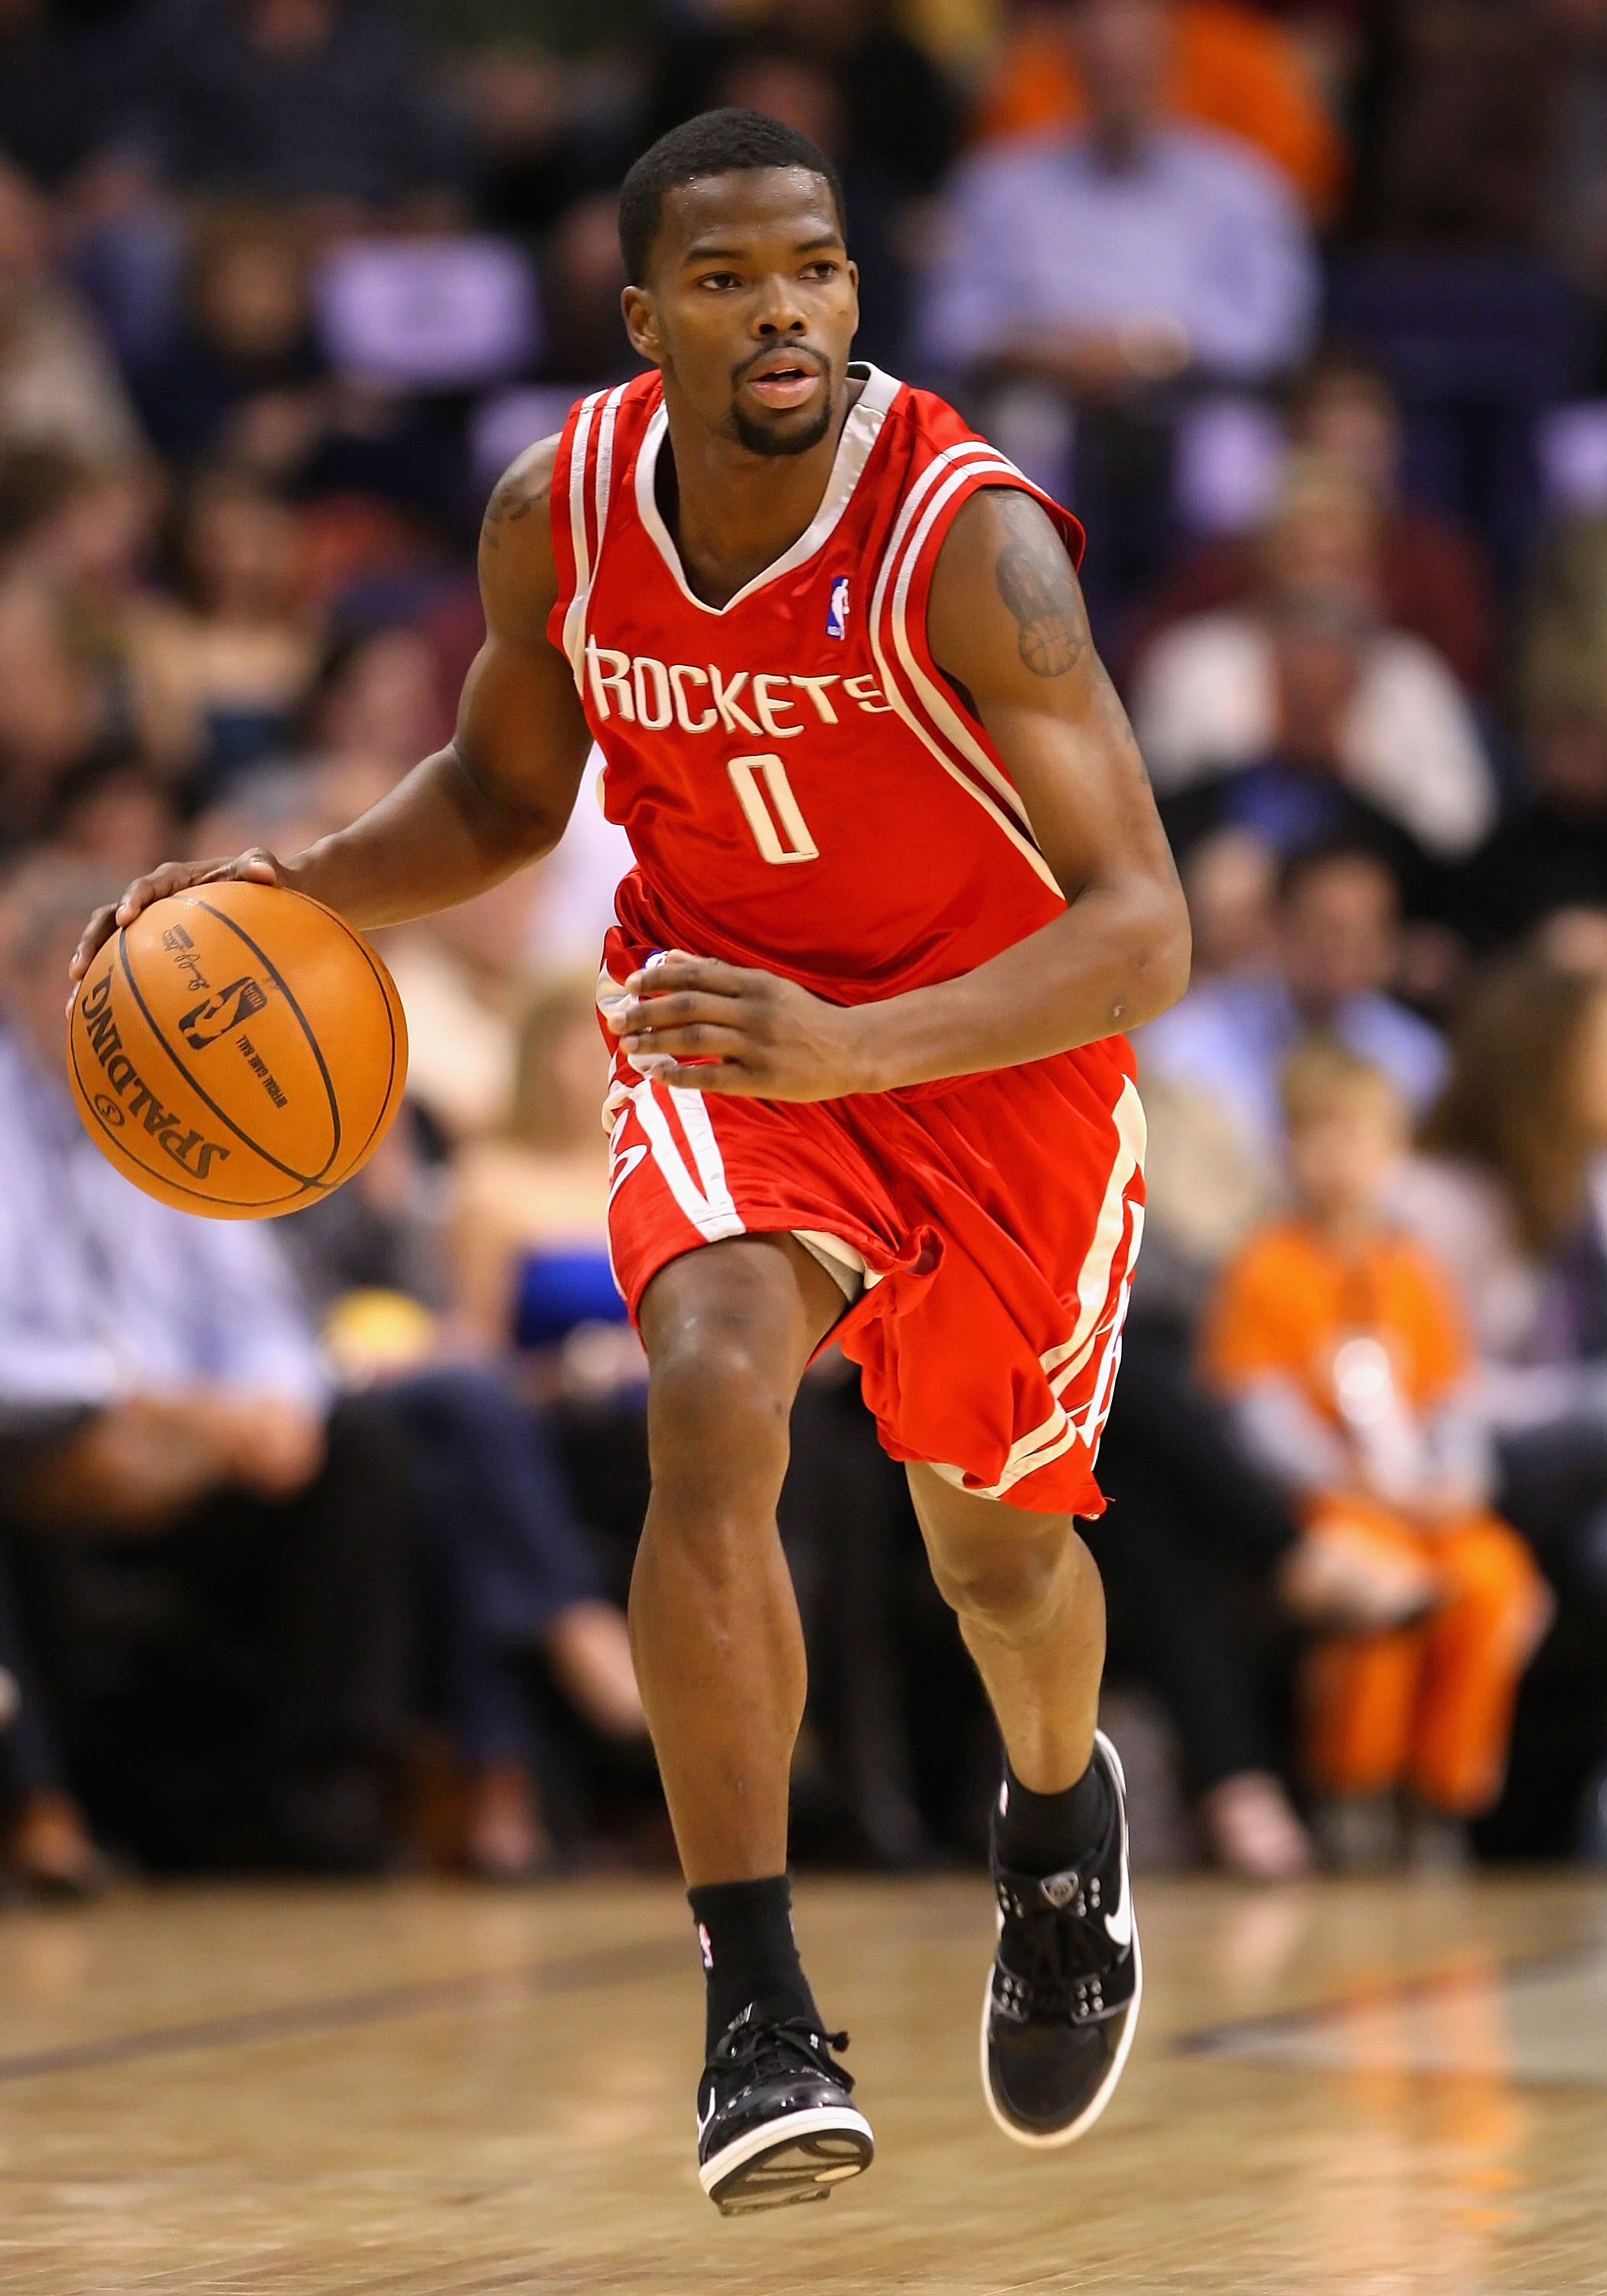 PHOENIX - JANUARY 06:  Aaron Brooks #0 of the Houston Rockets handles the ball during the NBA game against the Phoenix Suns at US Airways Center on January 6, 2010 in Phoenix, Arizona. The Suns defeated the Rockets 118-110.  NOTE TO USER: User expressly a